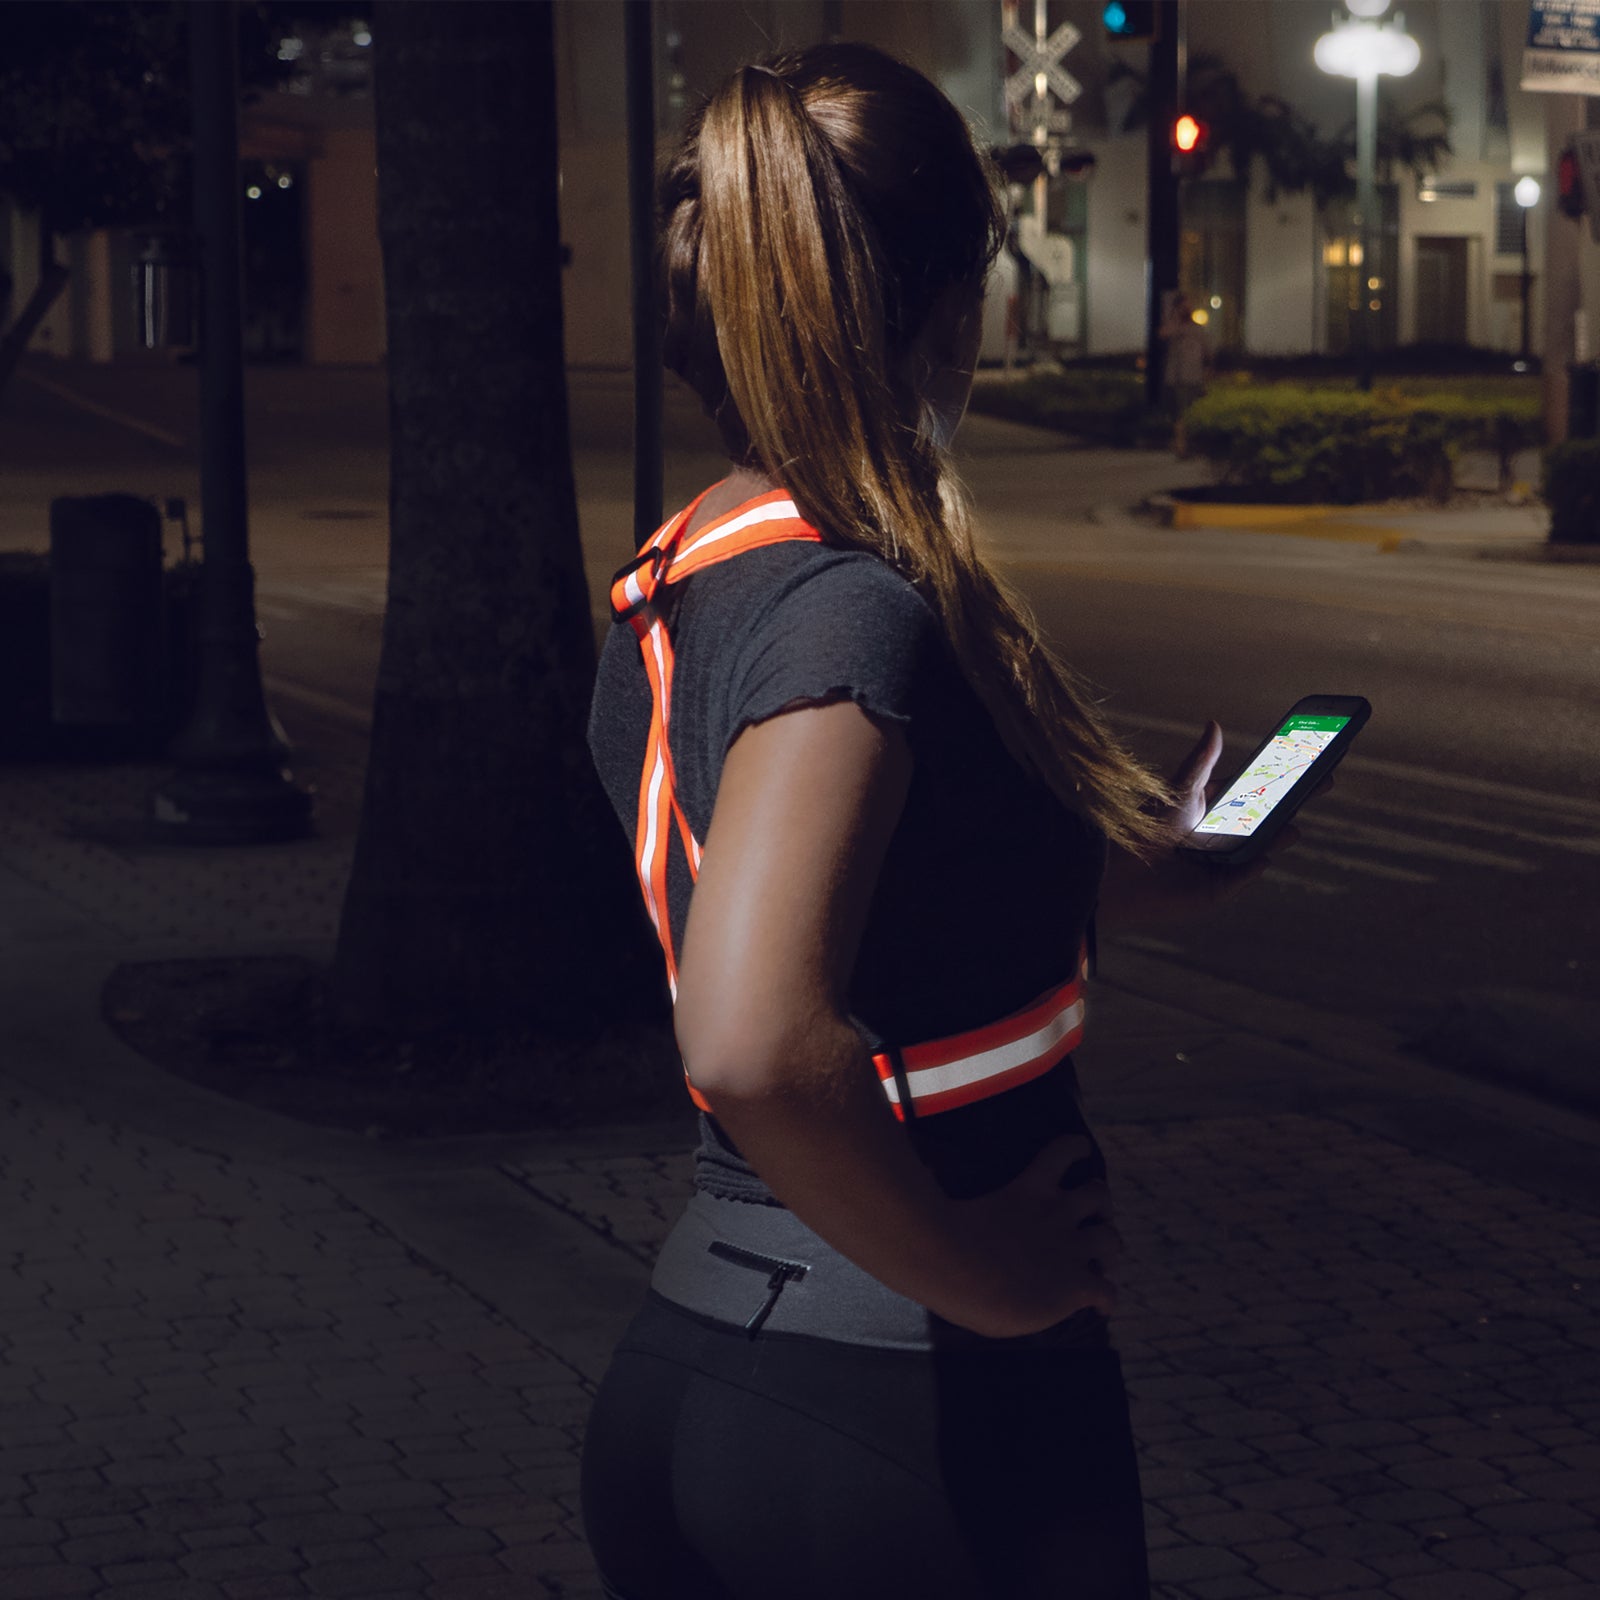 A woman wearing an orange JORESTECH safety suspender doing exercise on the street during night time